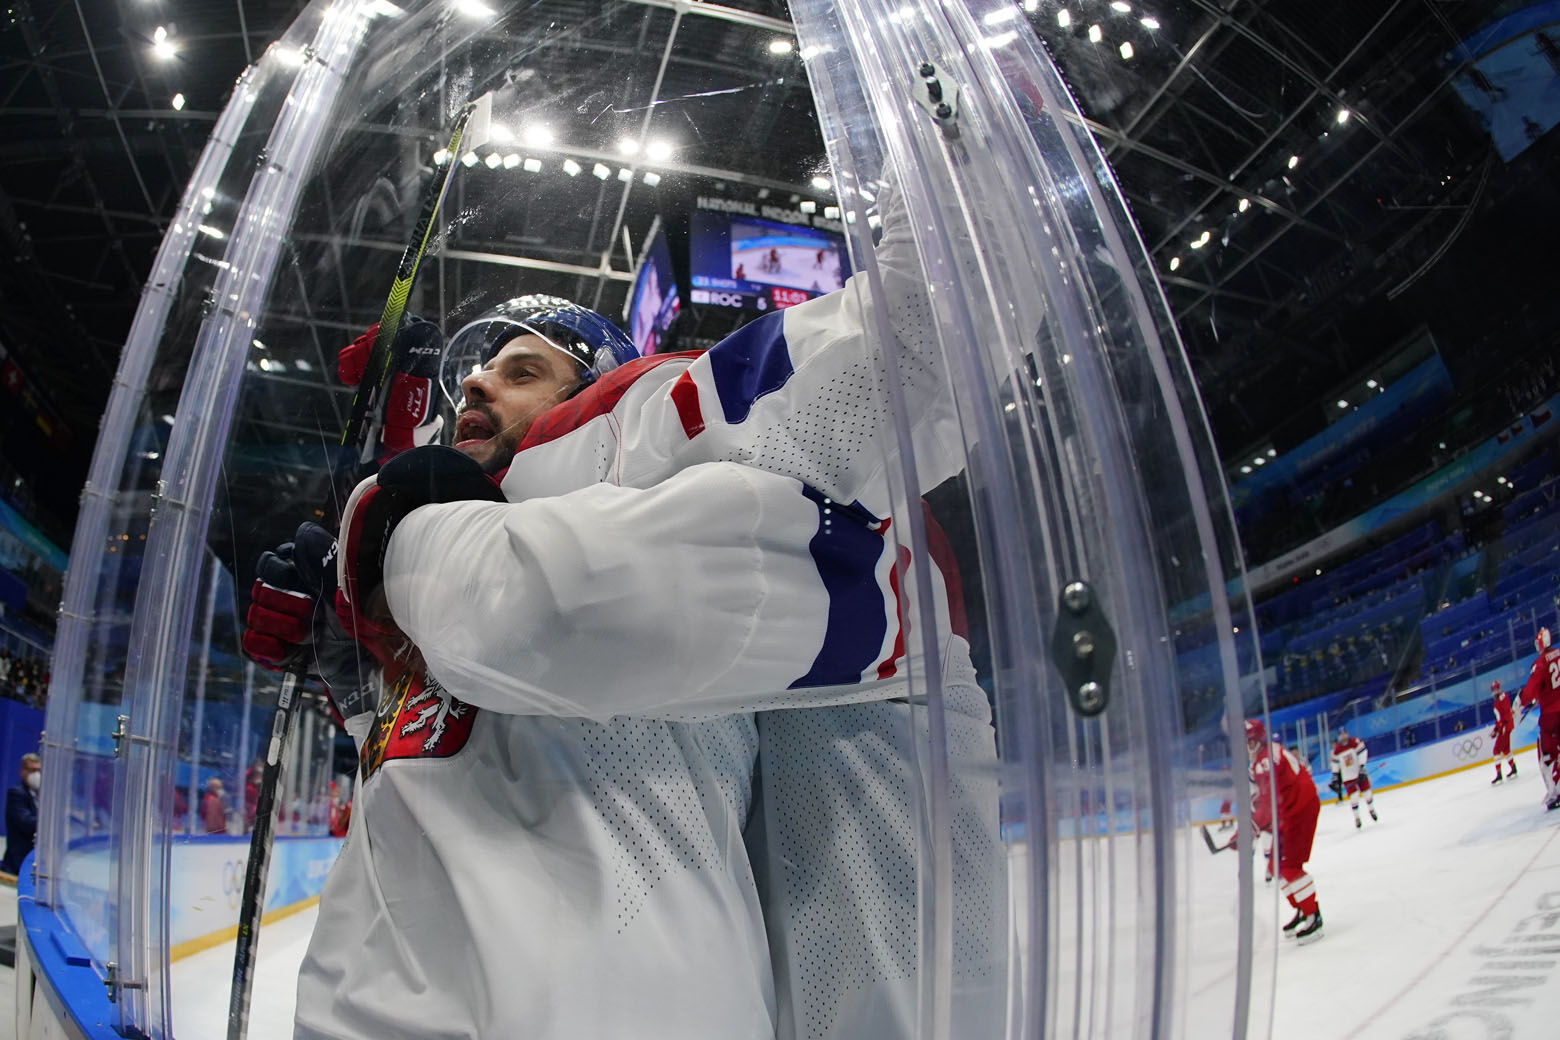 <p>Czech Republic&#8217;s Tomas Hyka celebrates after scoring a goal against Russian Olympic Committee during a preliminary round men&#8217;s hockey game at the 2022 Winter Olympics, Saturday, Feb. 12, 2022, in Beijing.</p>
